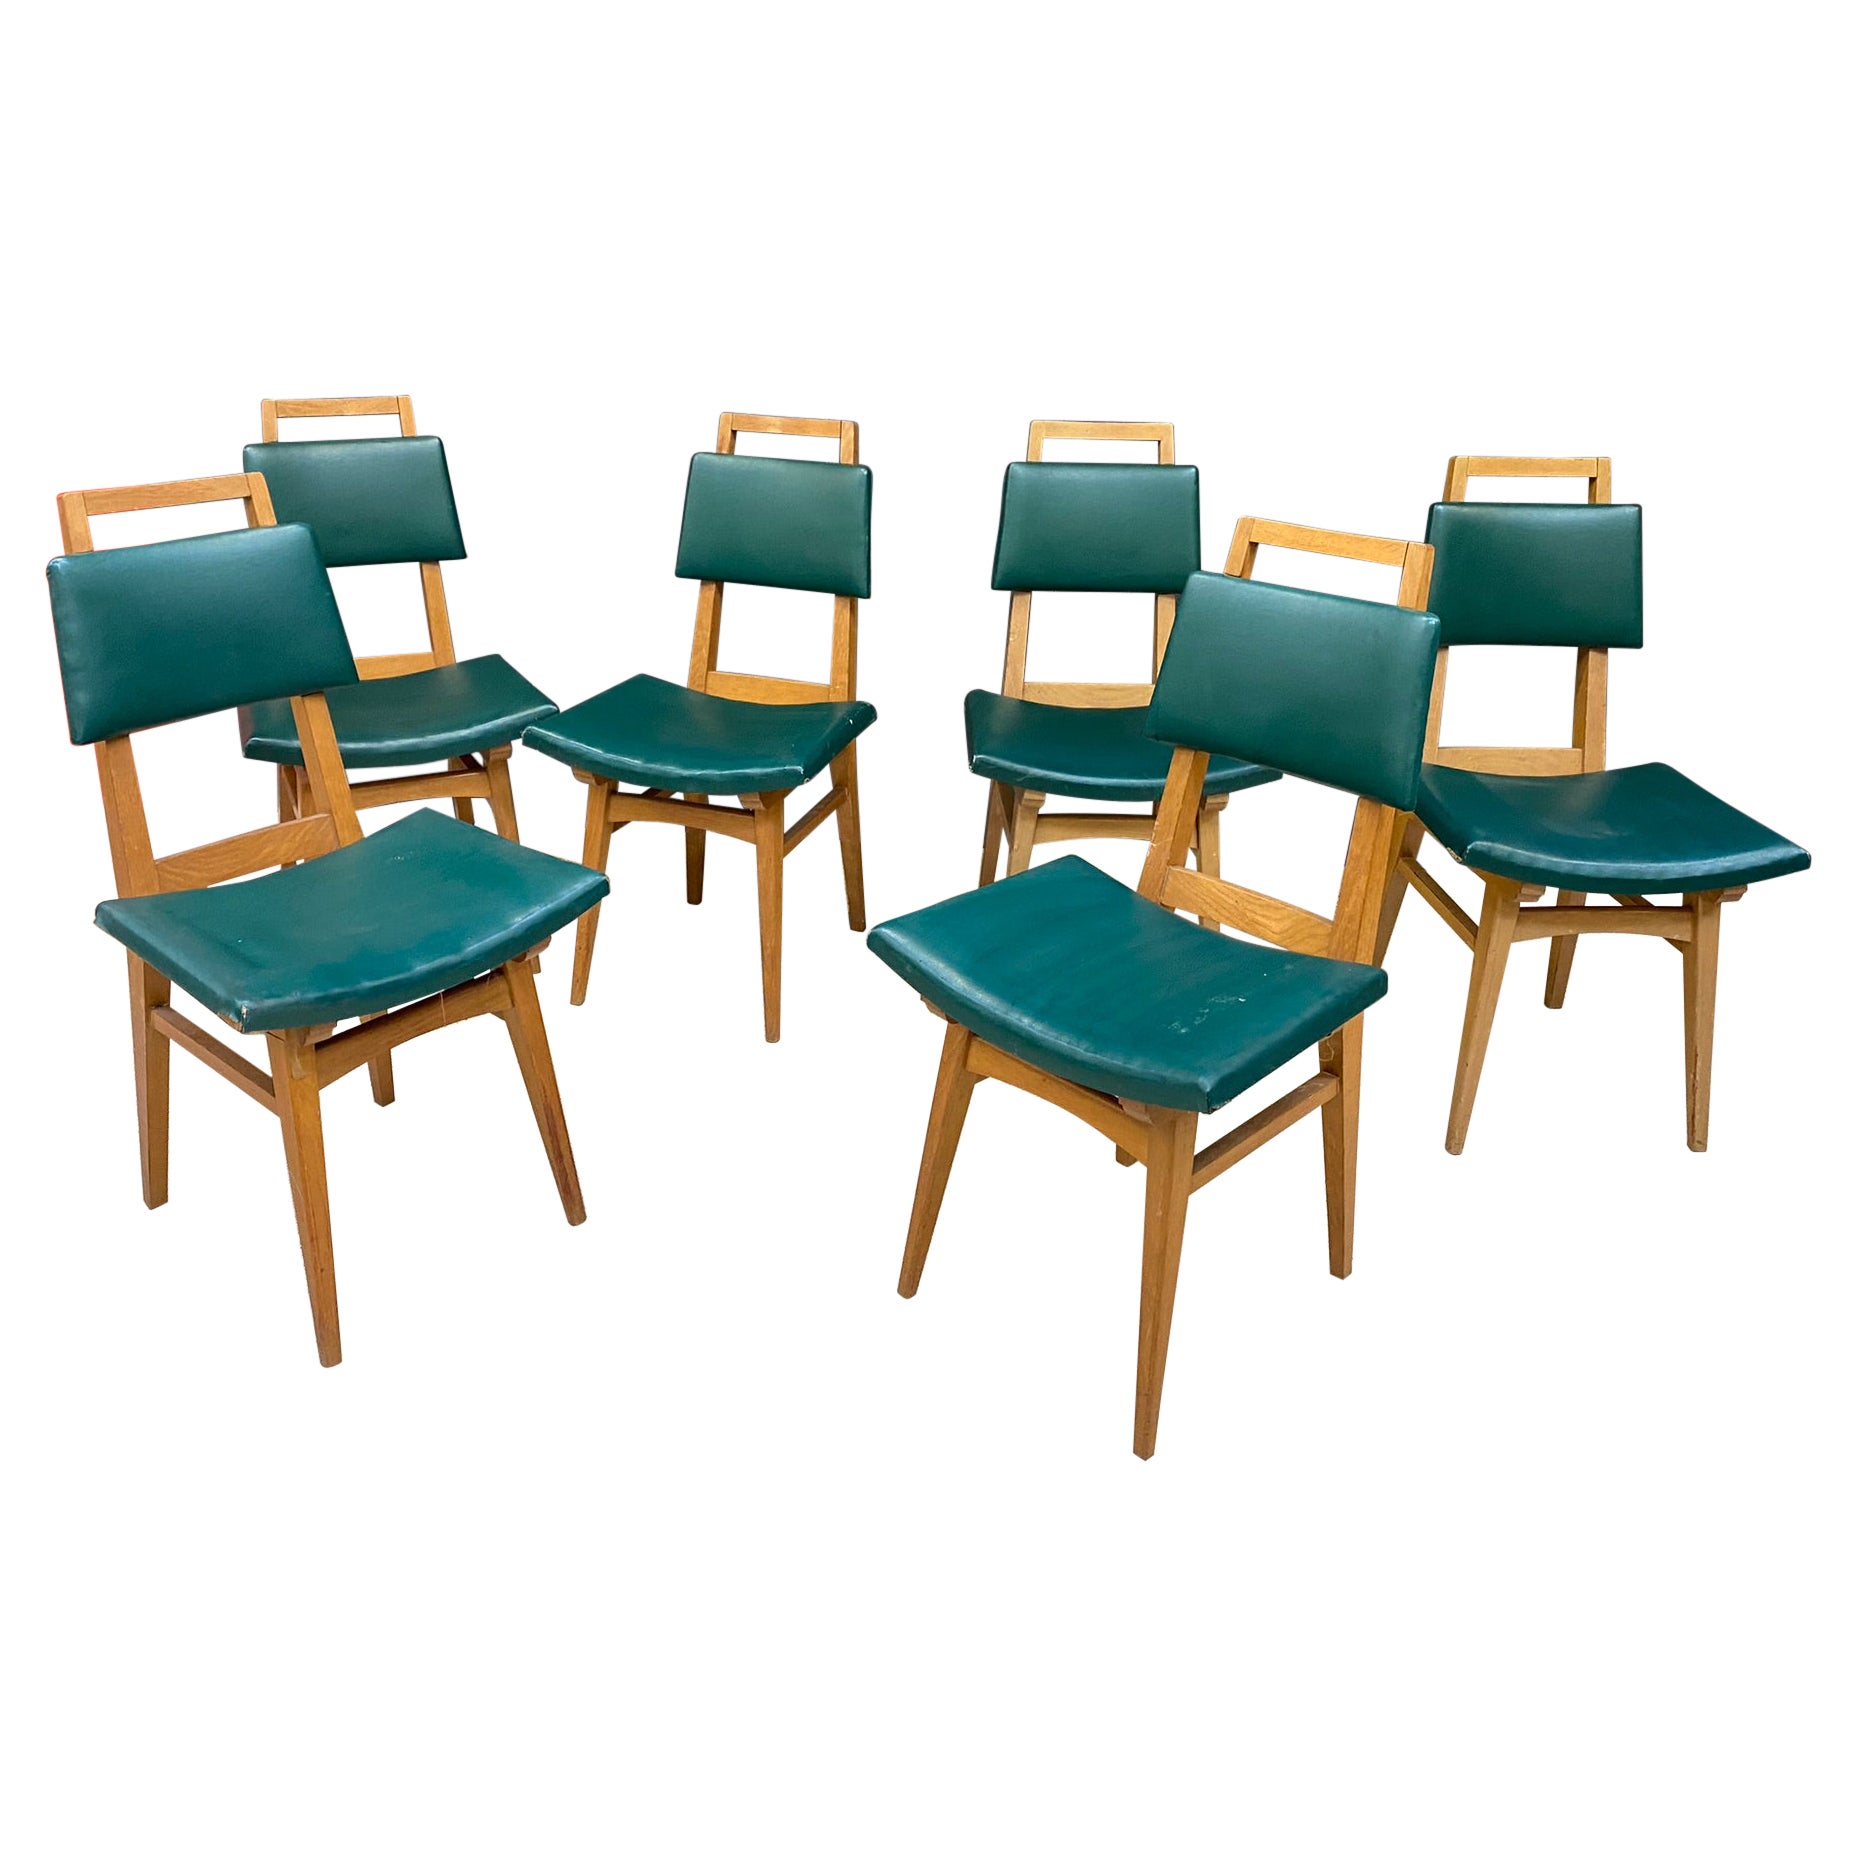 Suite of 6 Oak Chairs, circa 1950 For Sale